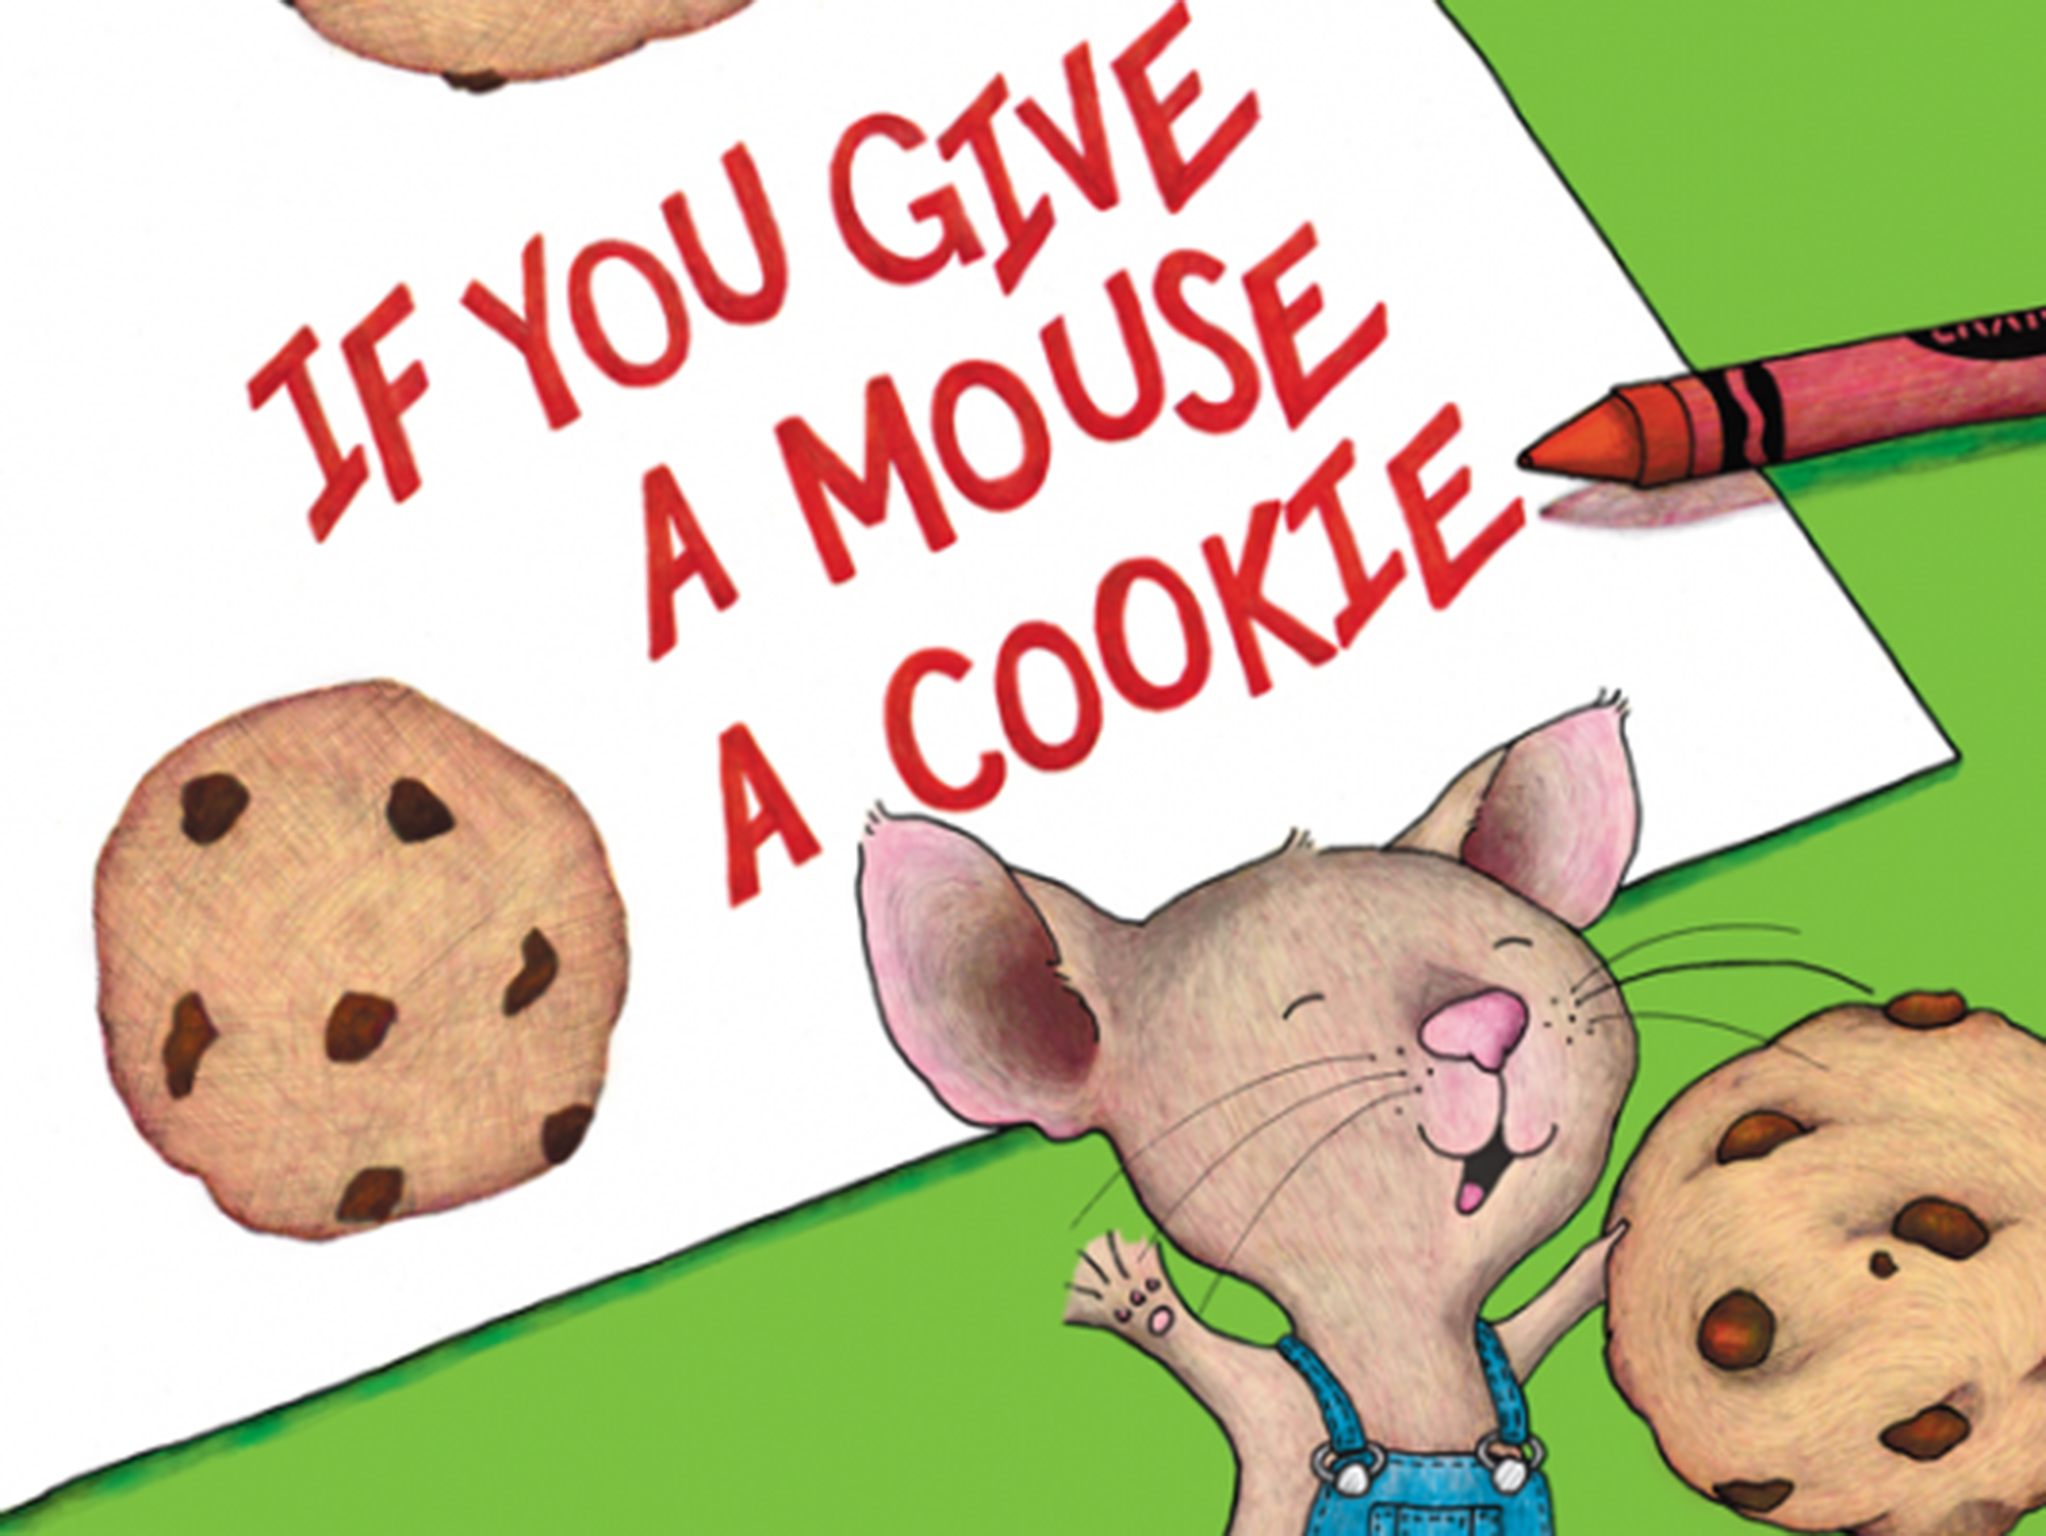 If you Give a Mouse a Cookie